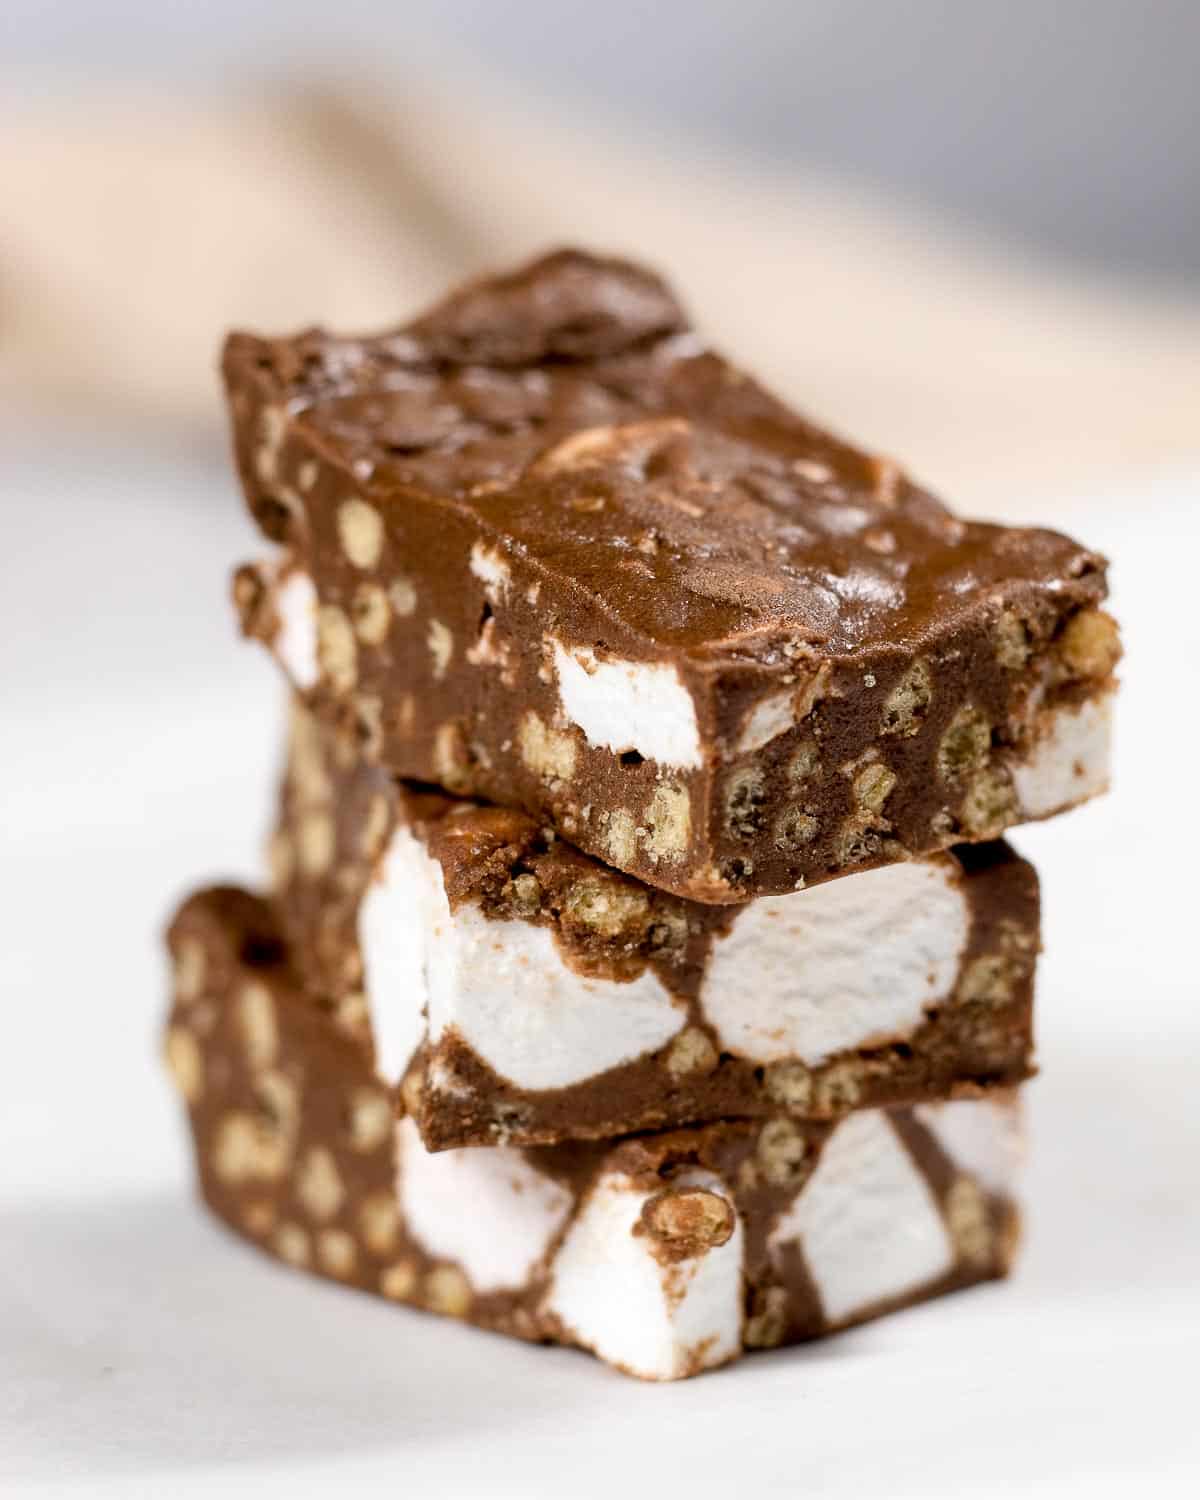 Three rocky road bars stacked on top of each other.